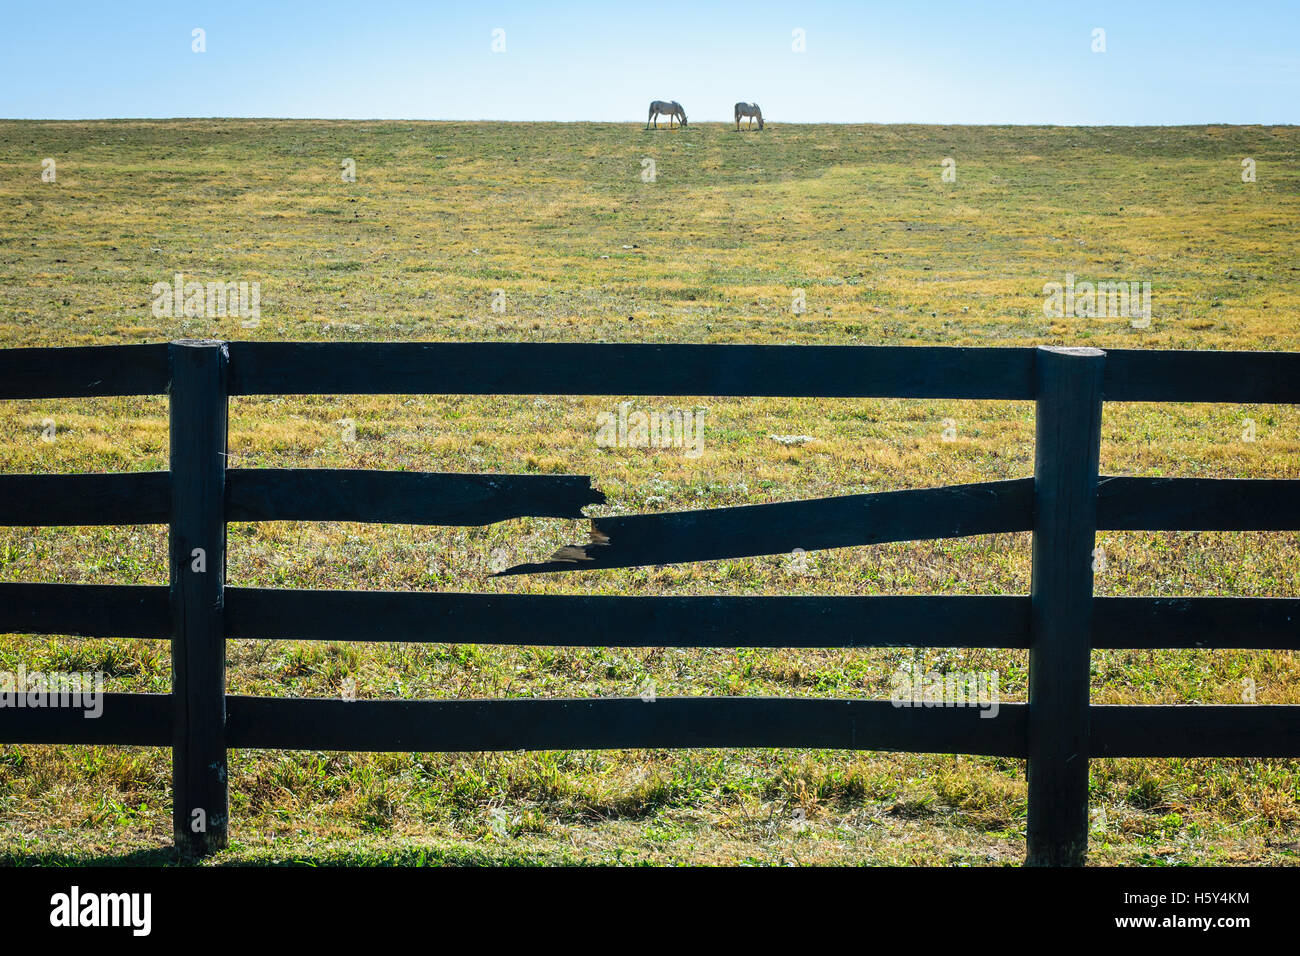 Two white horses in pasture with a broken wooden fence. Stock Photo